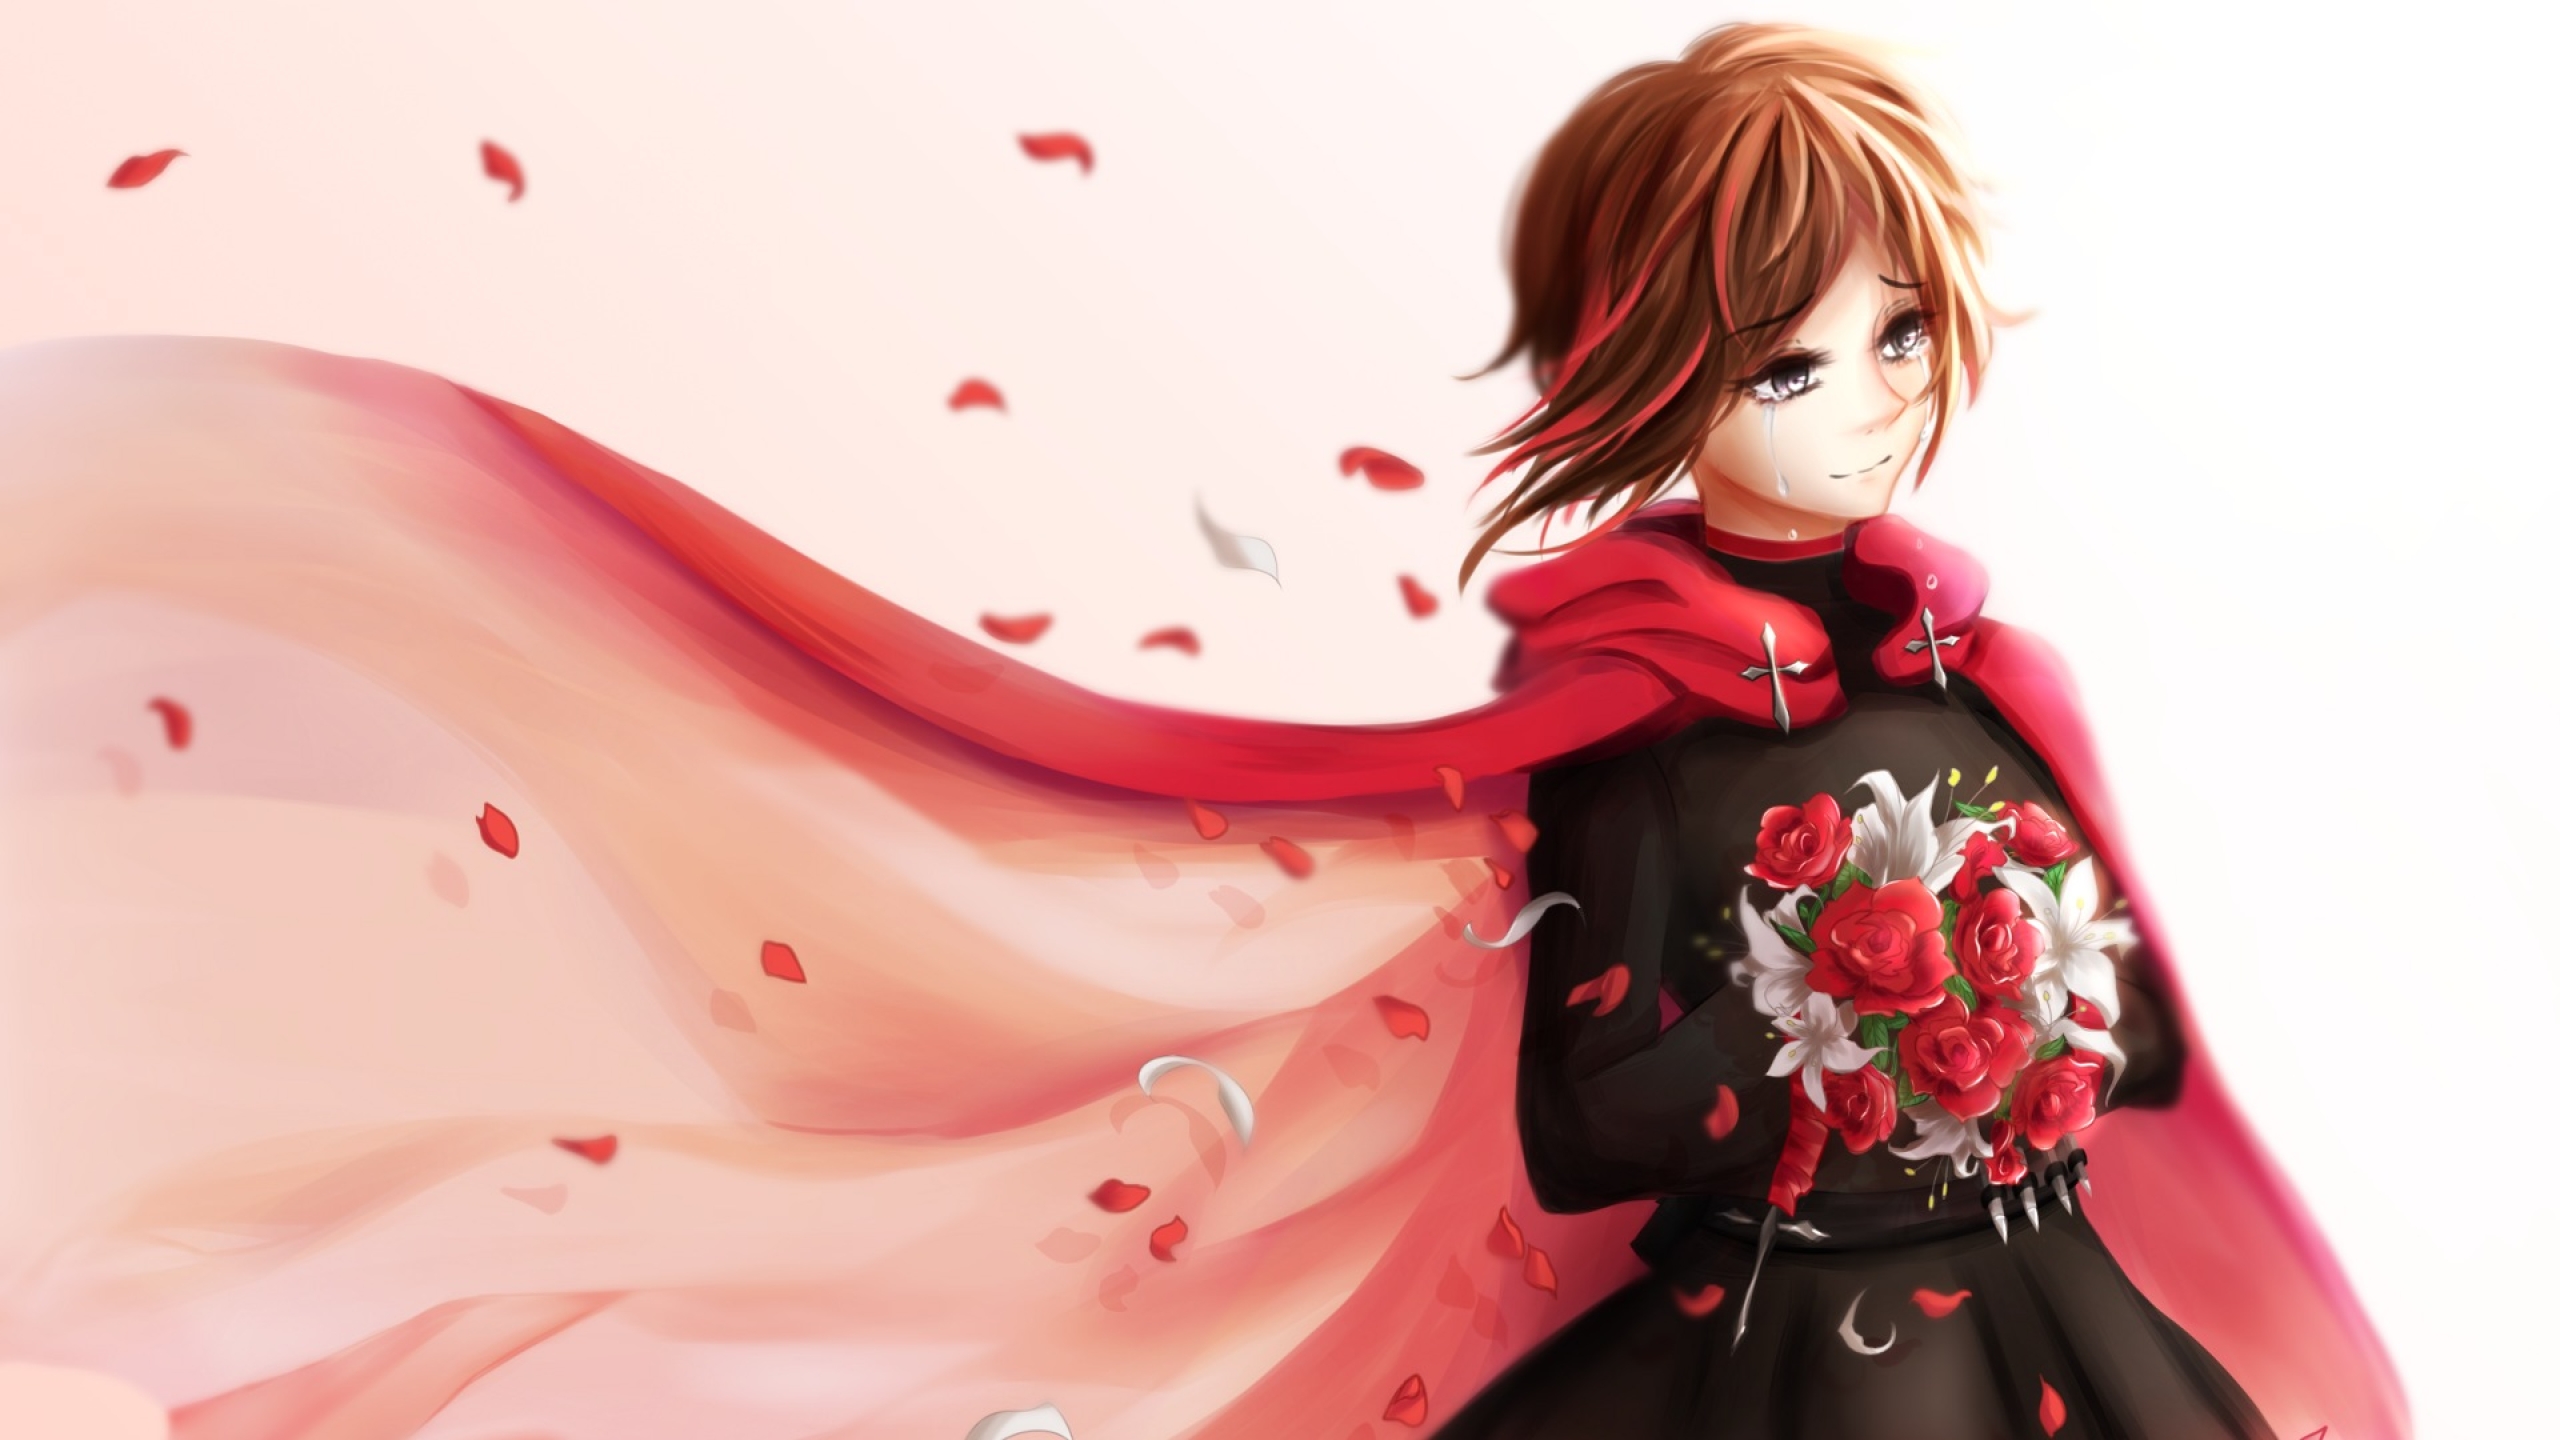 Posts with tags Pixiv, Ruby rose - pikabu.monster